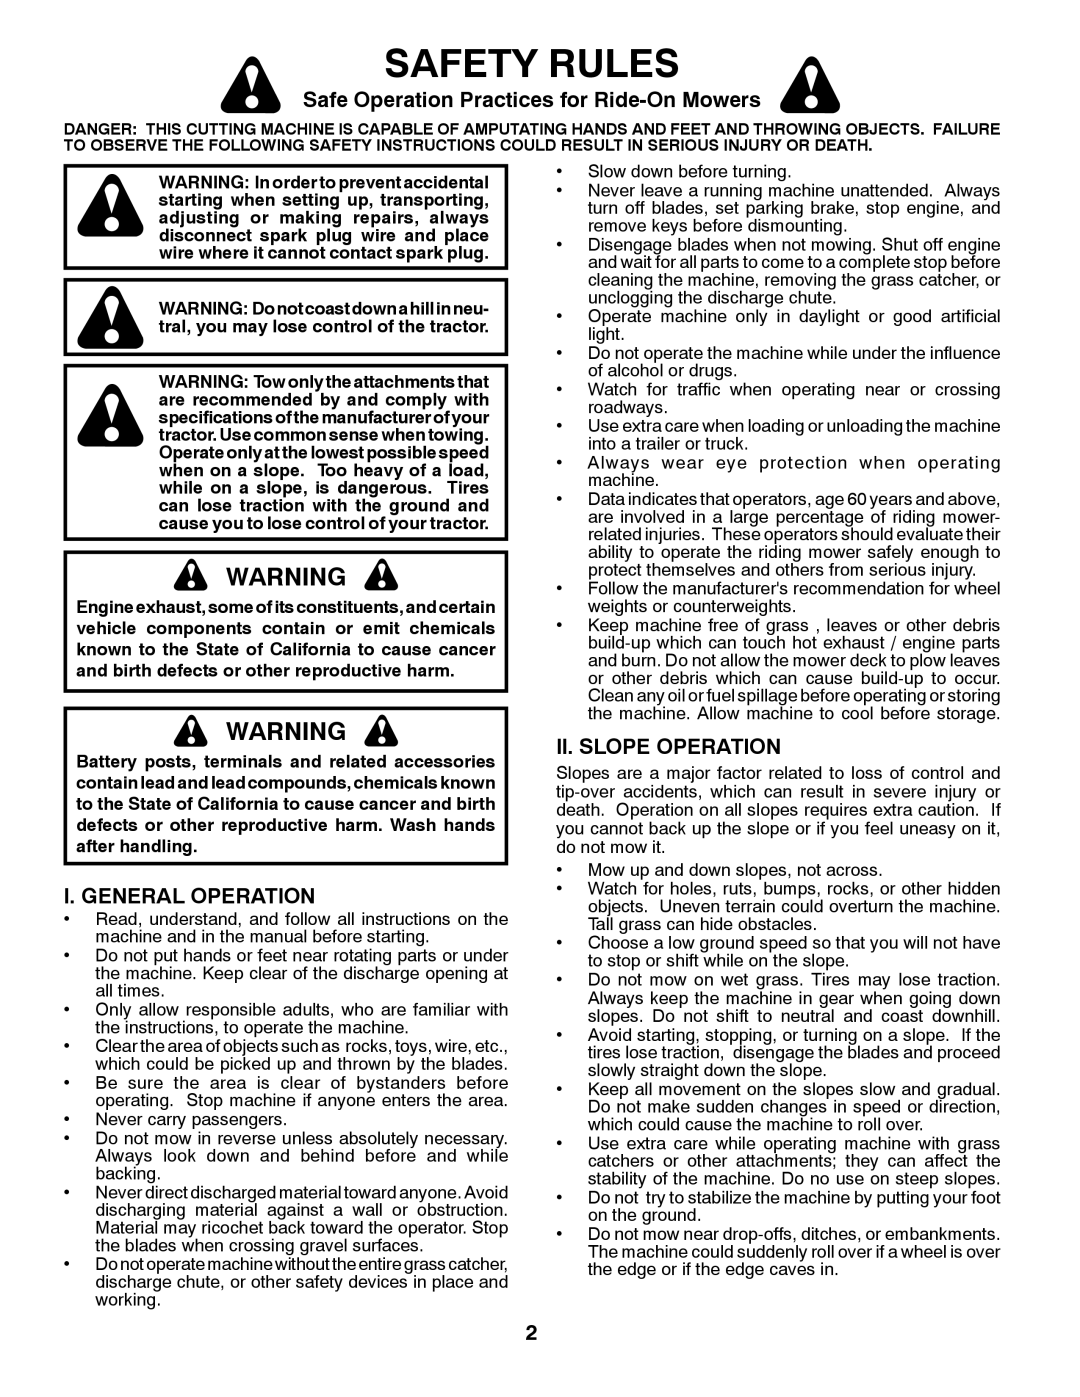 Husqvarna 96045002202 Safety Rules, Safe Operation Practices for Ride-On Mowers, I. General Operation, Ii. Slope Operation 